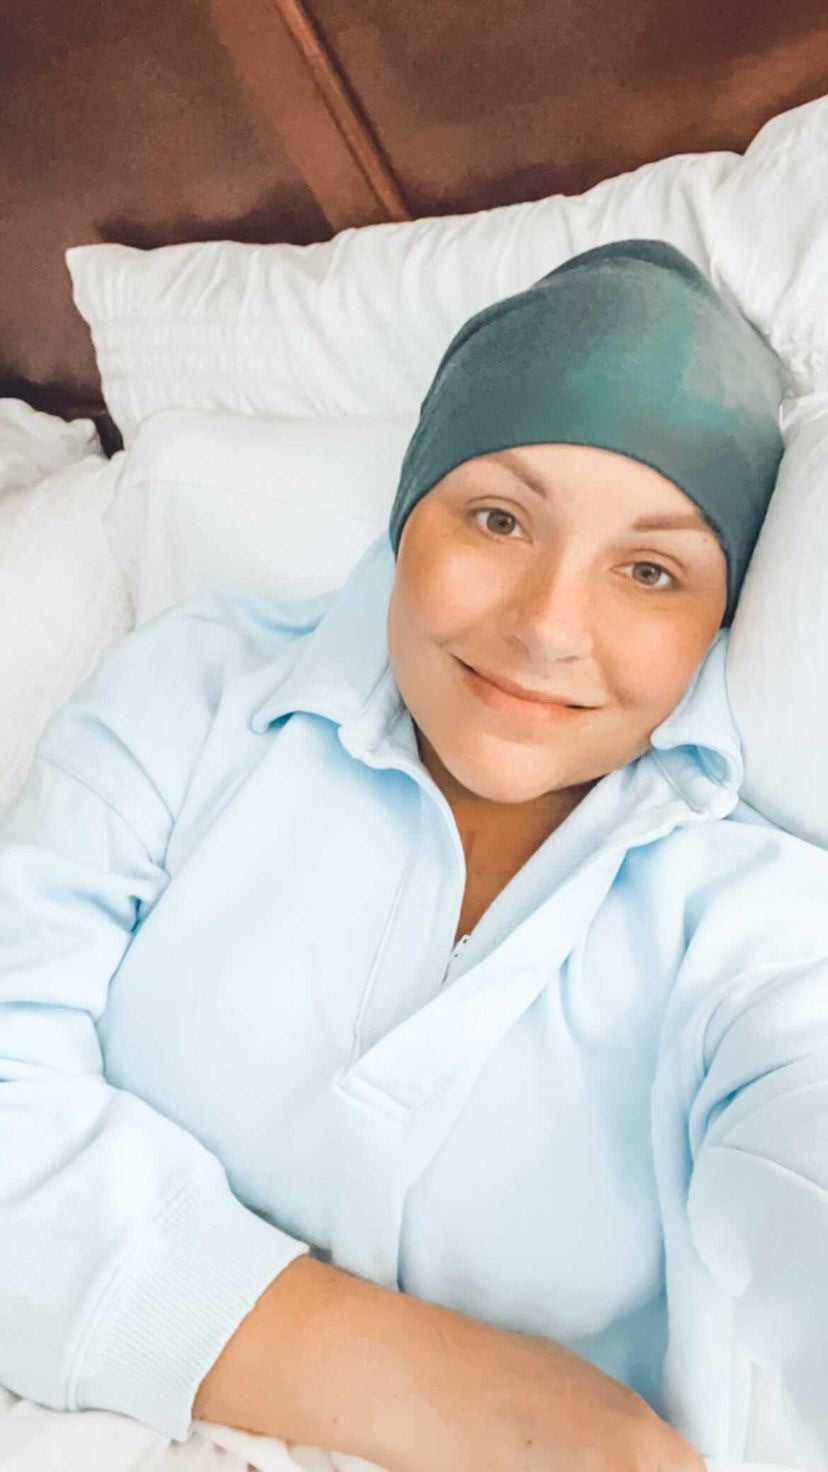 3 Chemo Hats for $90